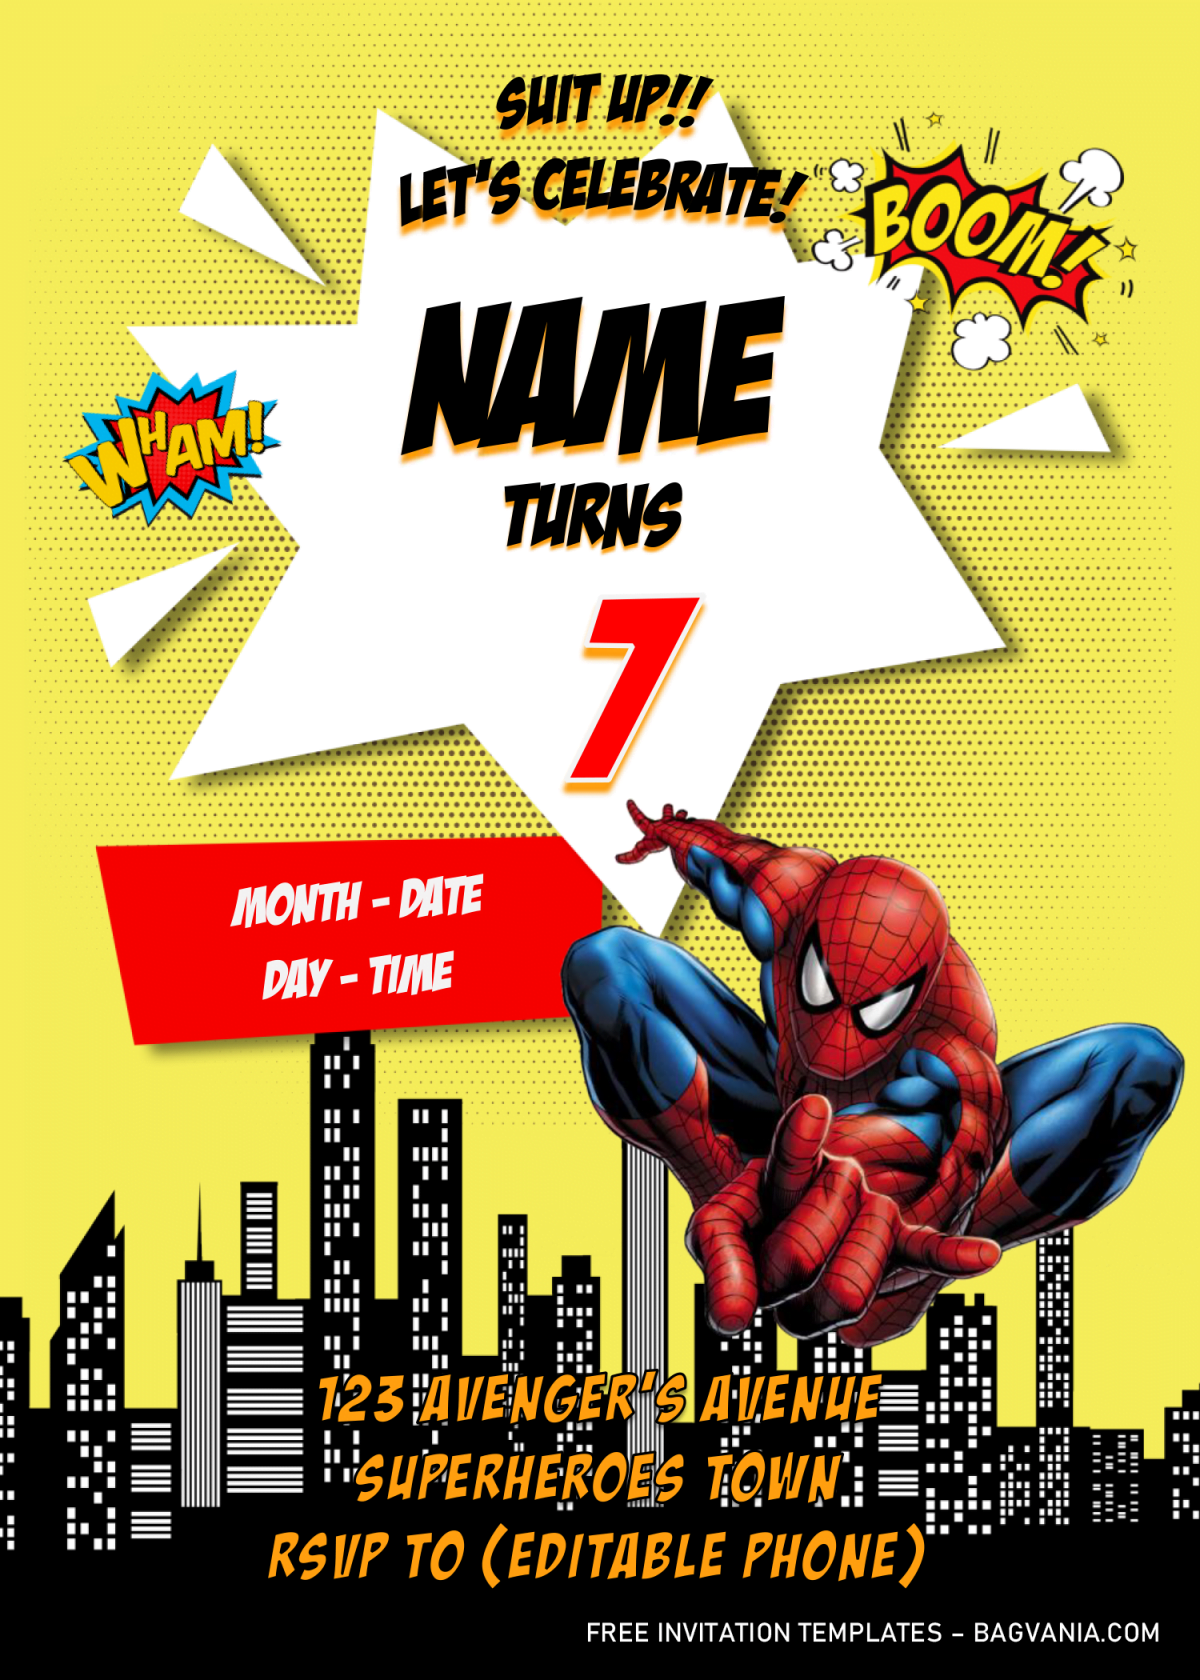 Avengers Birthday Party Invitation Templates - Editable With MS Word and has spiderman